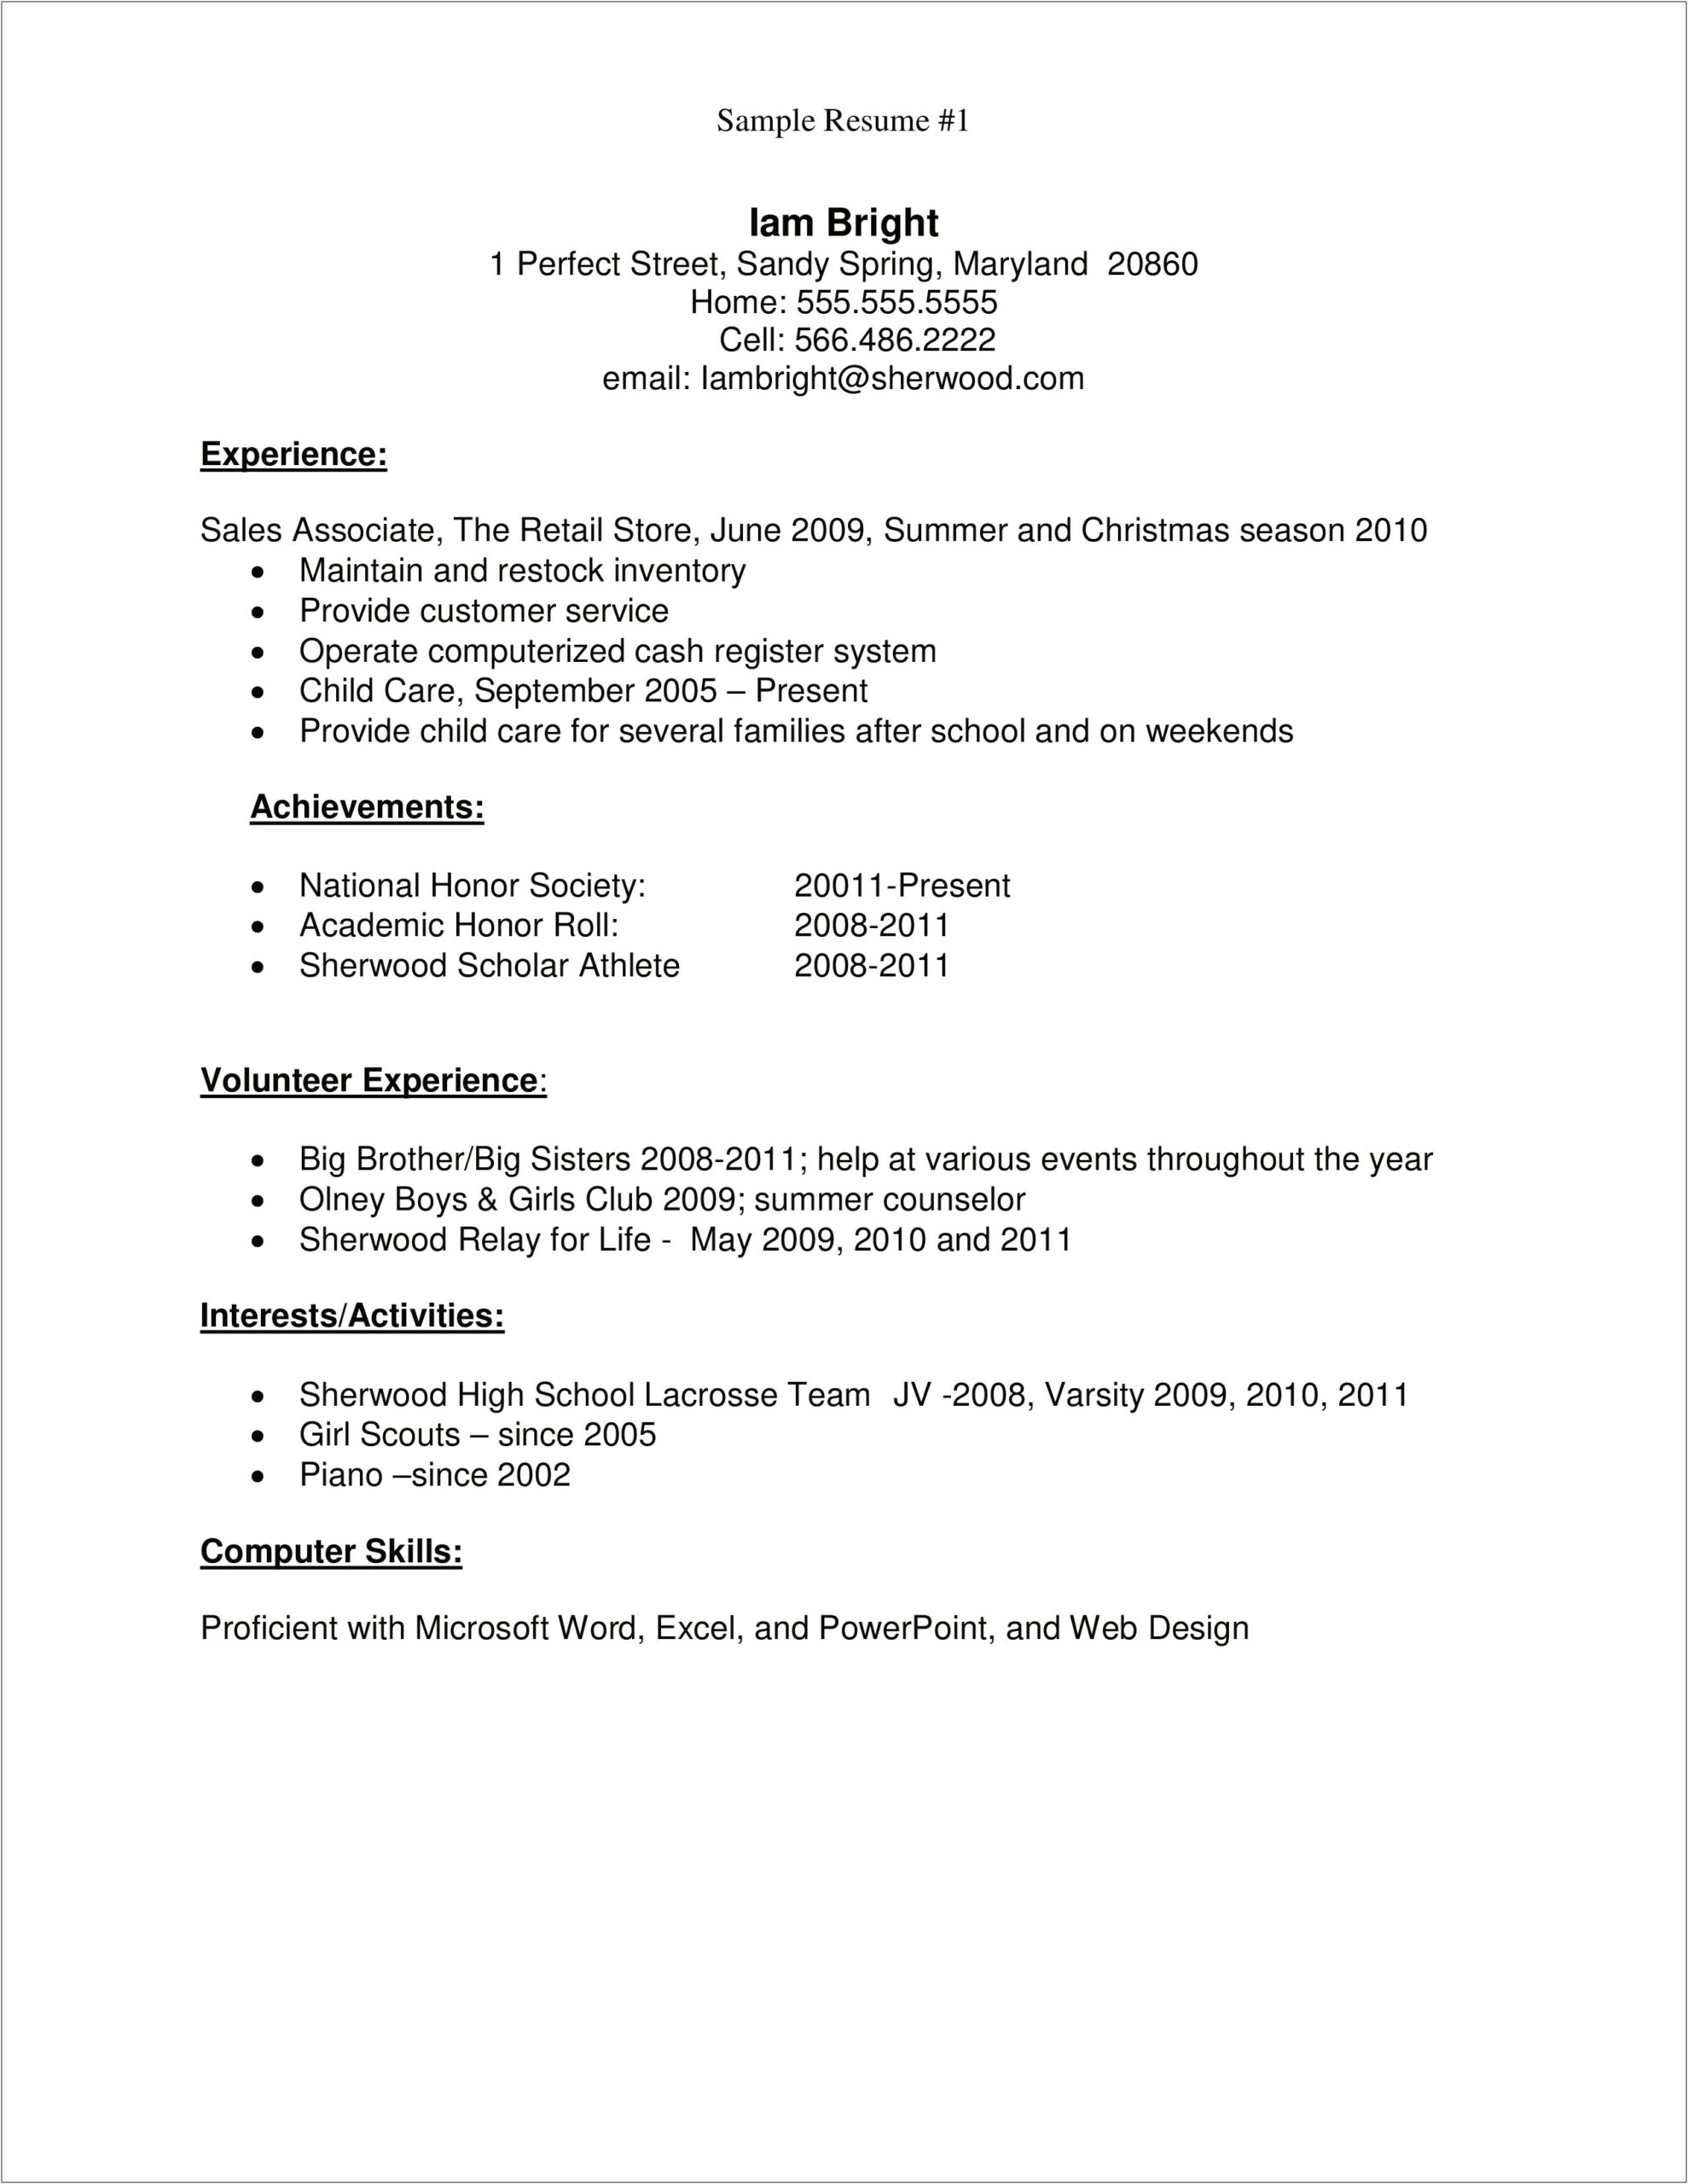 Examples Of National Honor Society Resumes